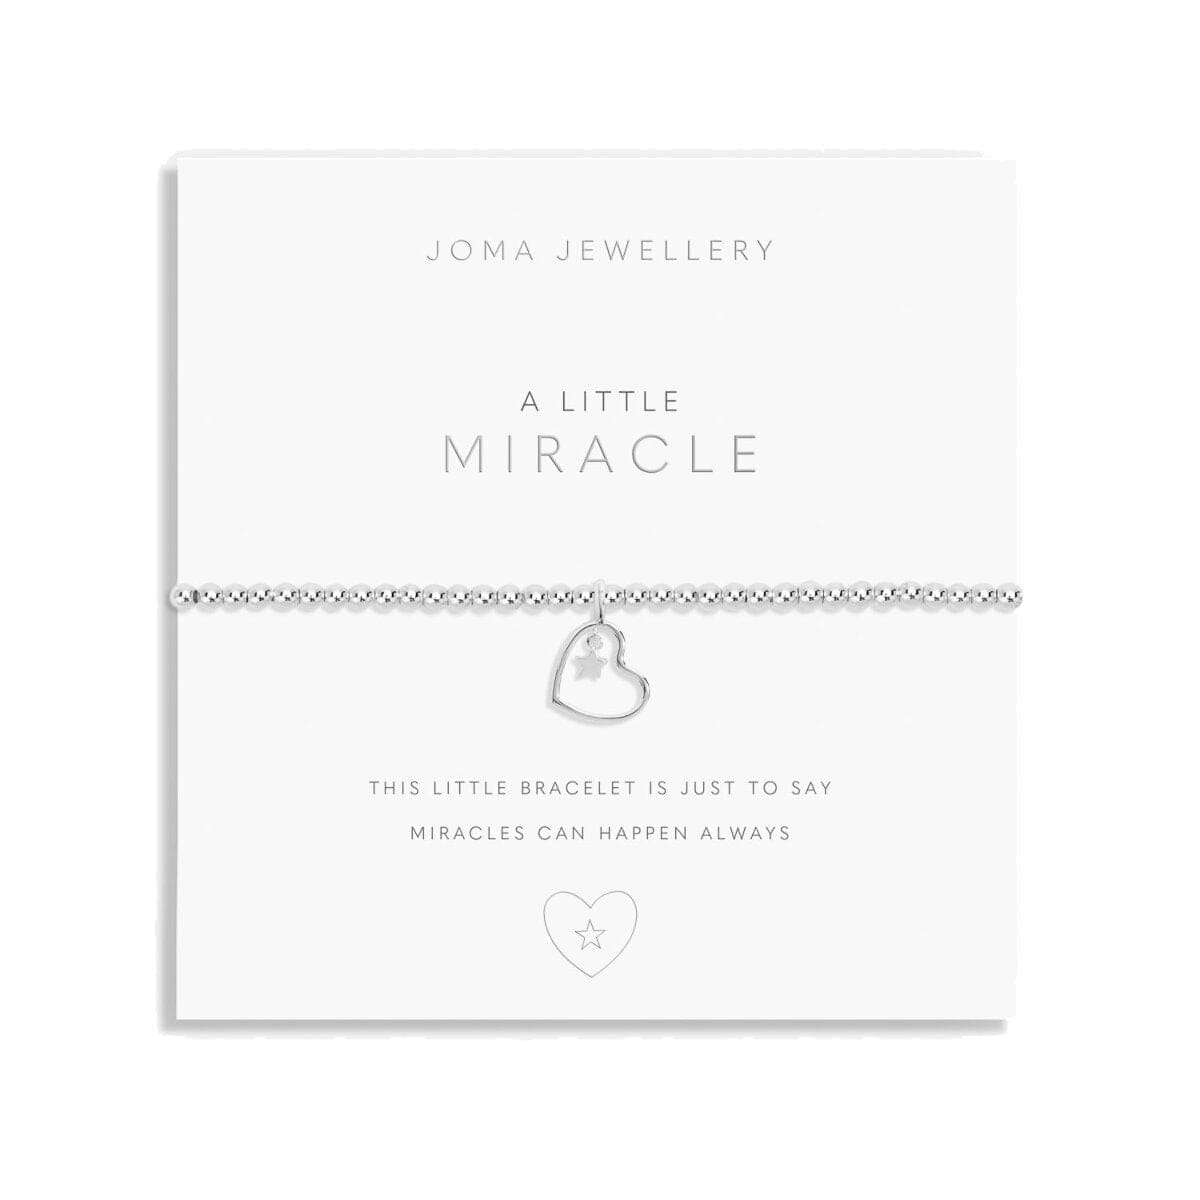 Joma Jewellery Bracelet Joma Jewellery Bracelet - A Little Miracle